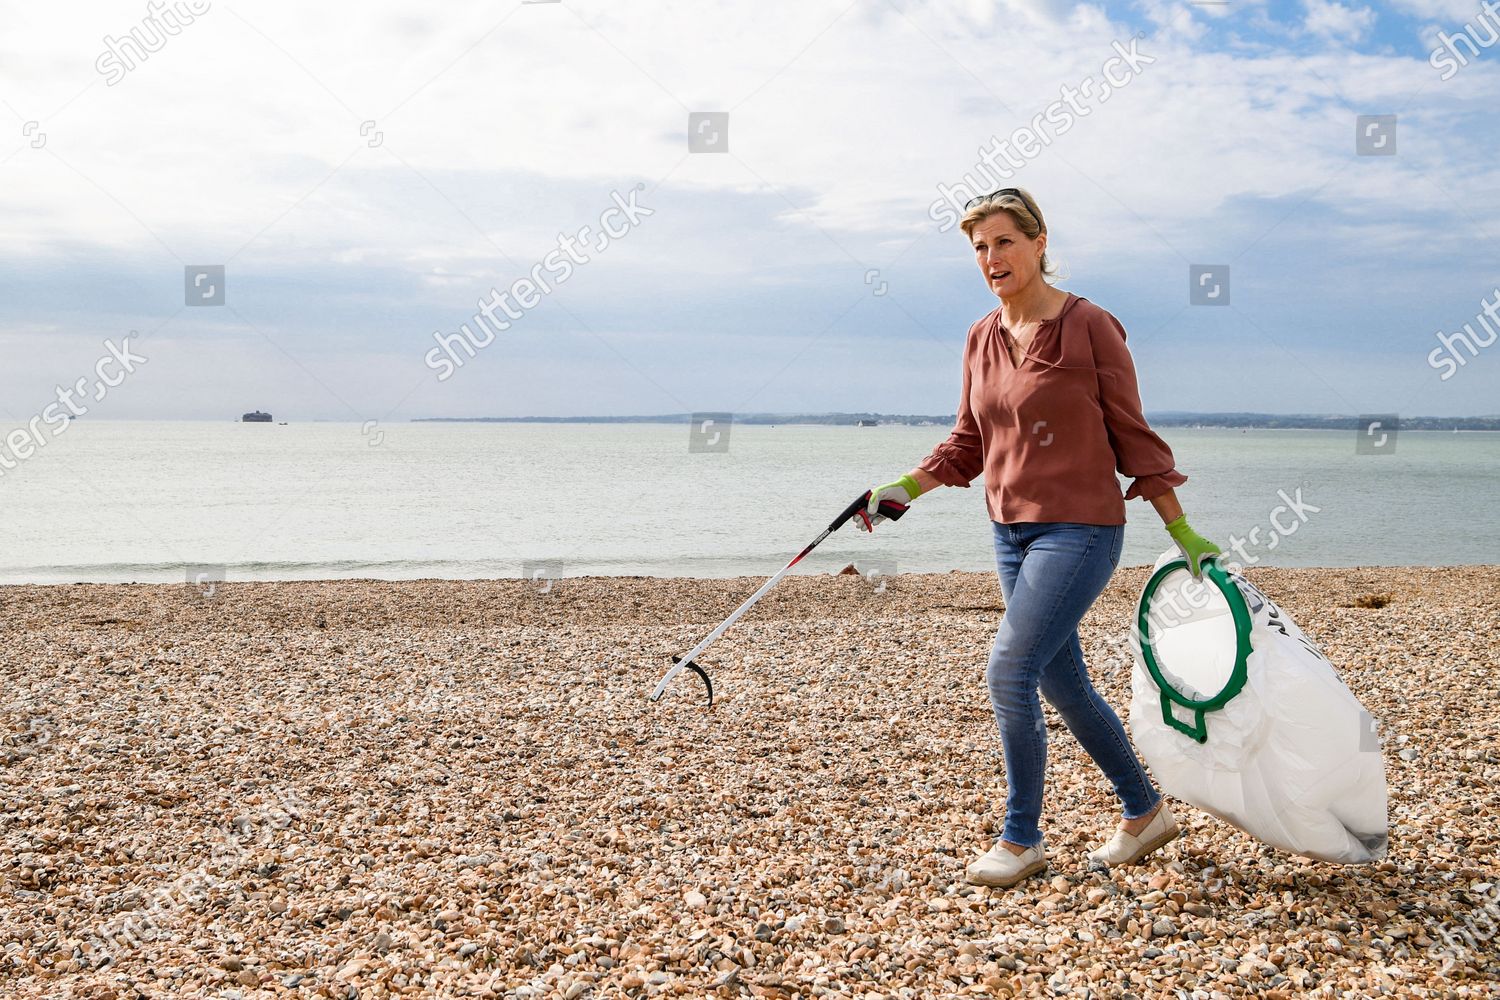 prince-edward-and-sophie-countess-of-wessex-great-british-beach-clean-southsea-beach-portsmouth-uk-shutterstock-editorial-10782998ak.jpg